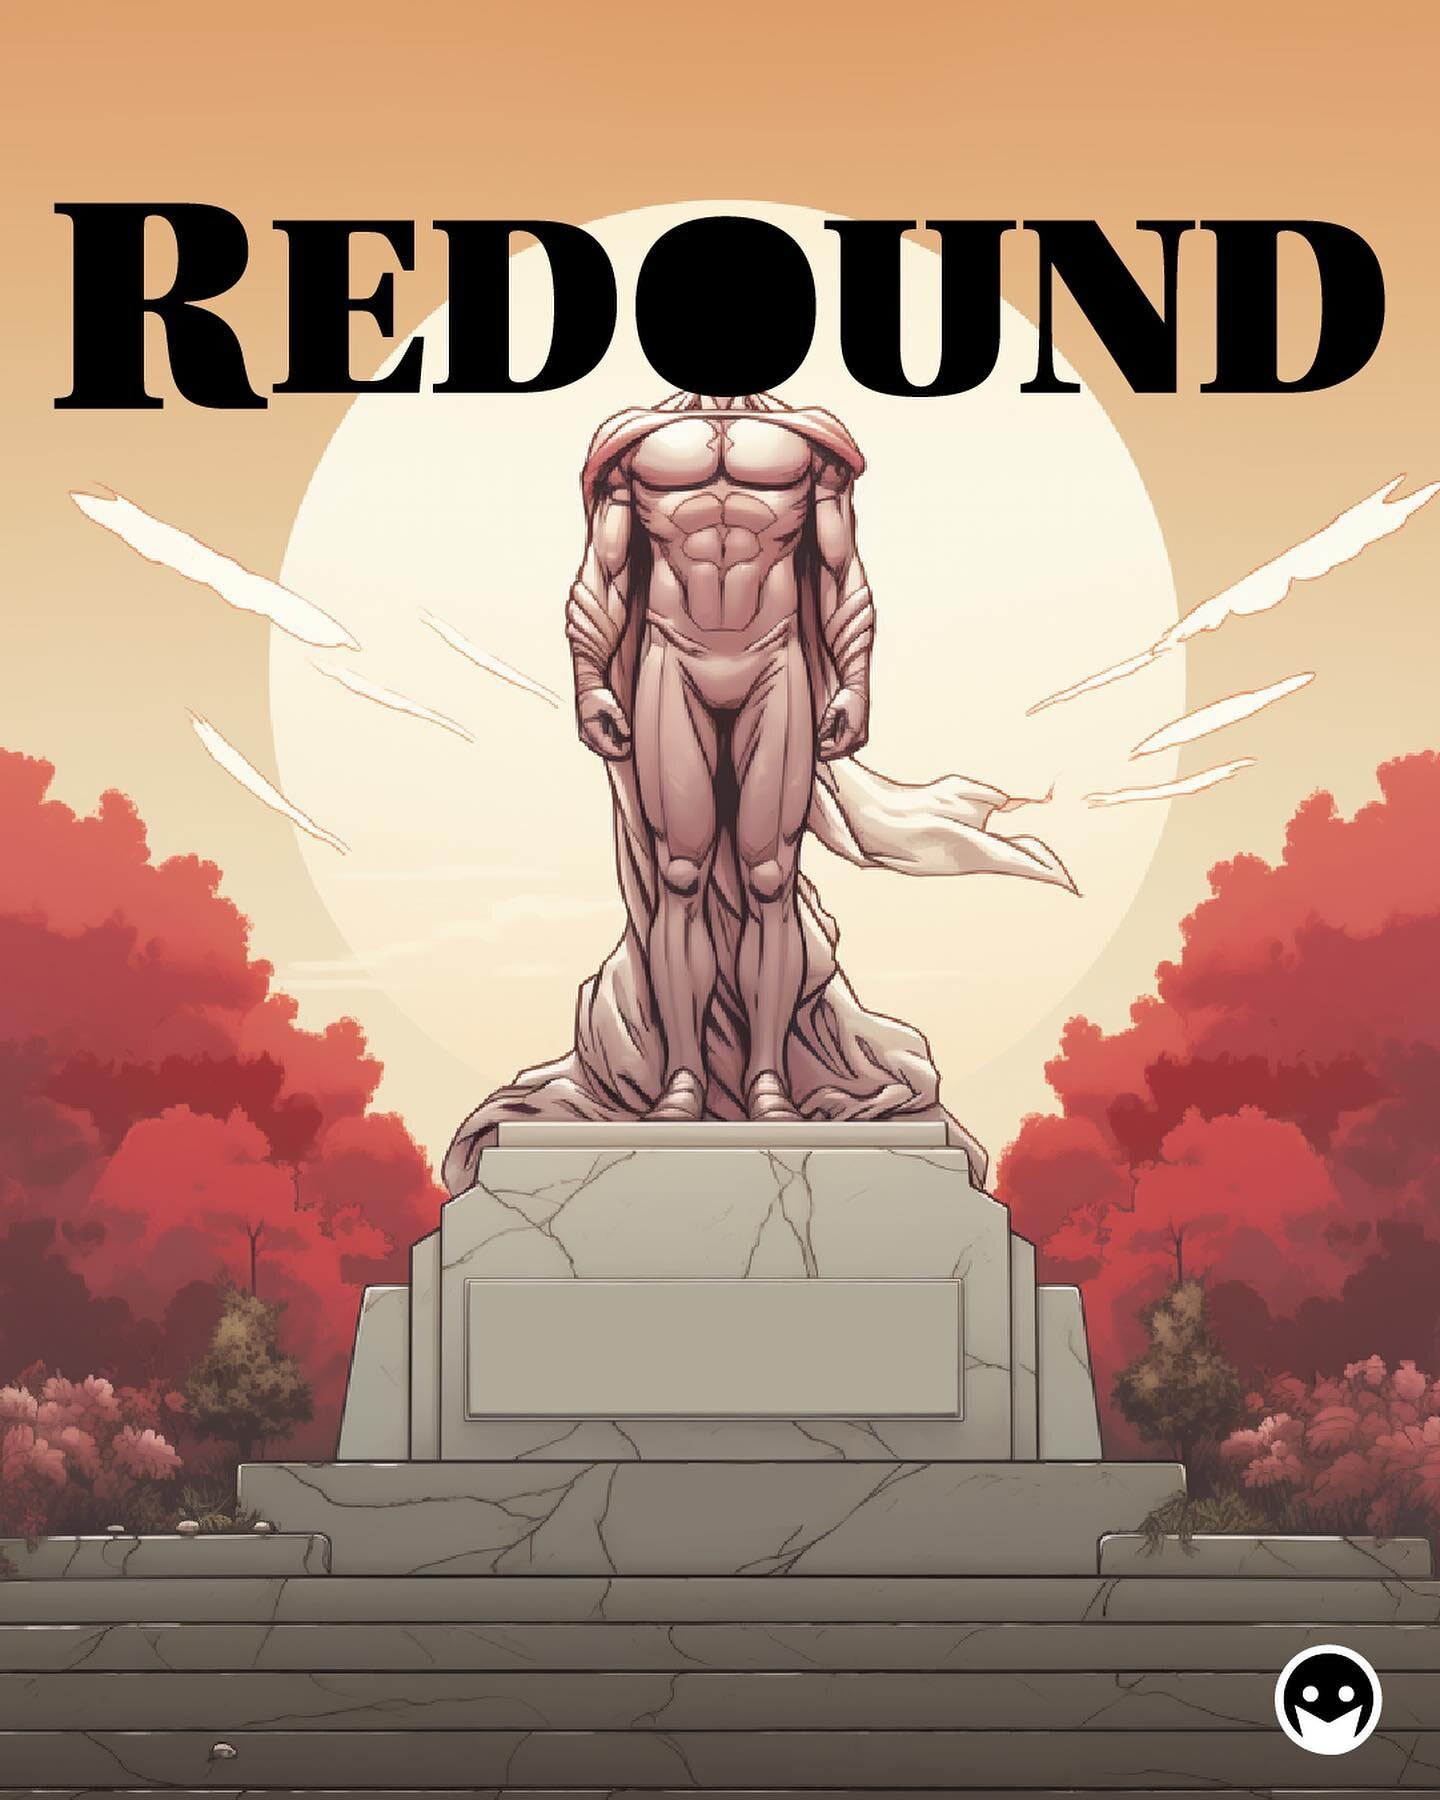 Redound: a formal word that when paired with to means &ldquo;to have a particular result.&rdquo; It is often used in one of two idioms: &ldquo;It redounds to someone's credit/honor&rdquo; is used to say that a person deserves credit/respect for havin